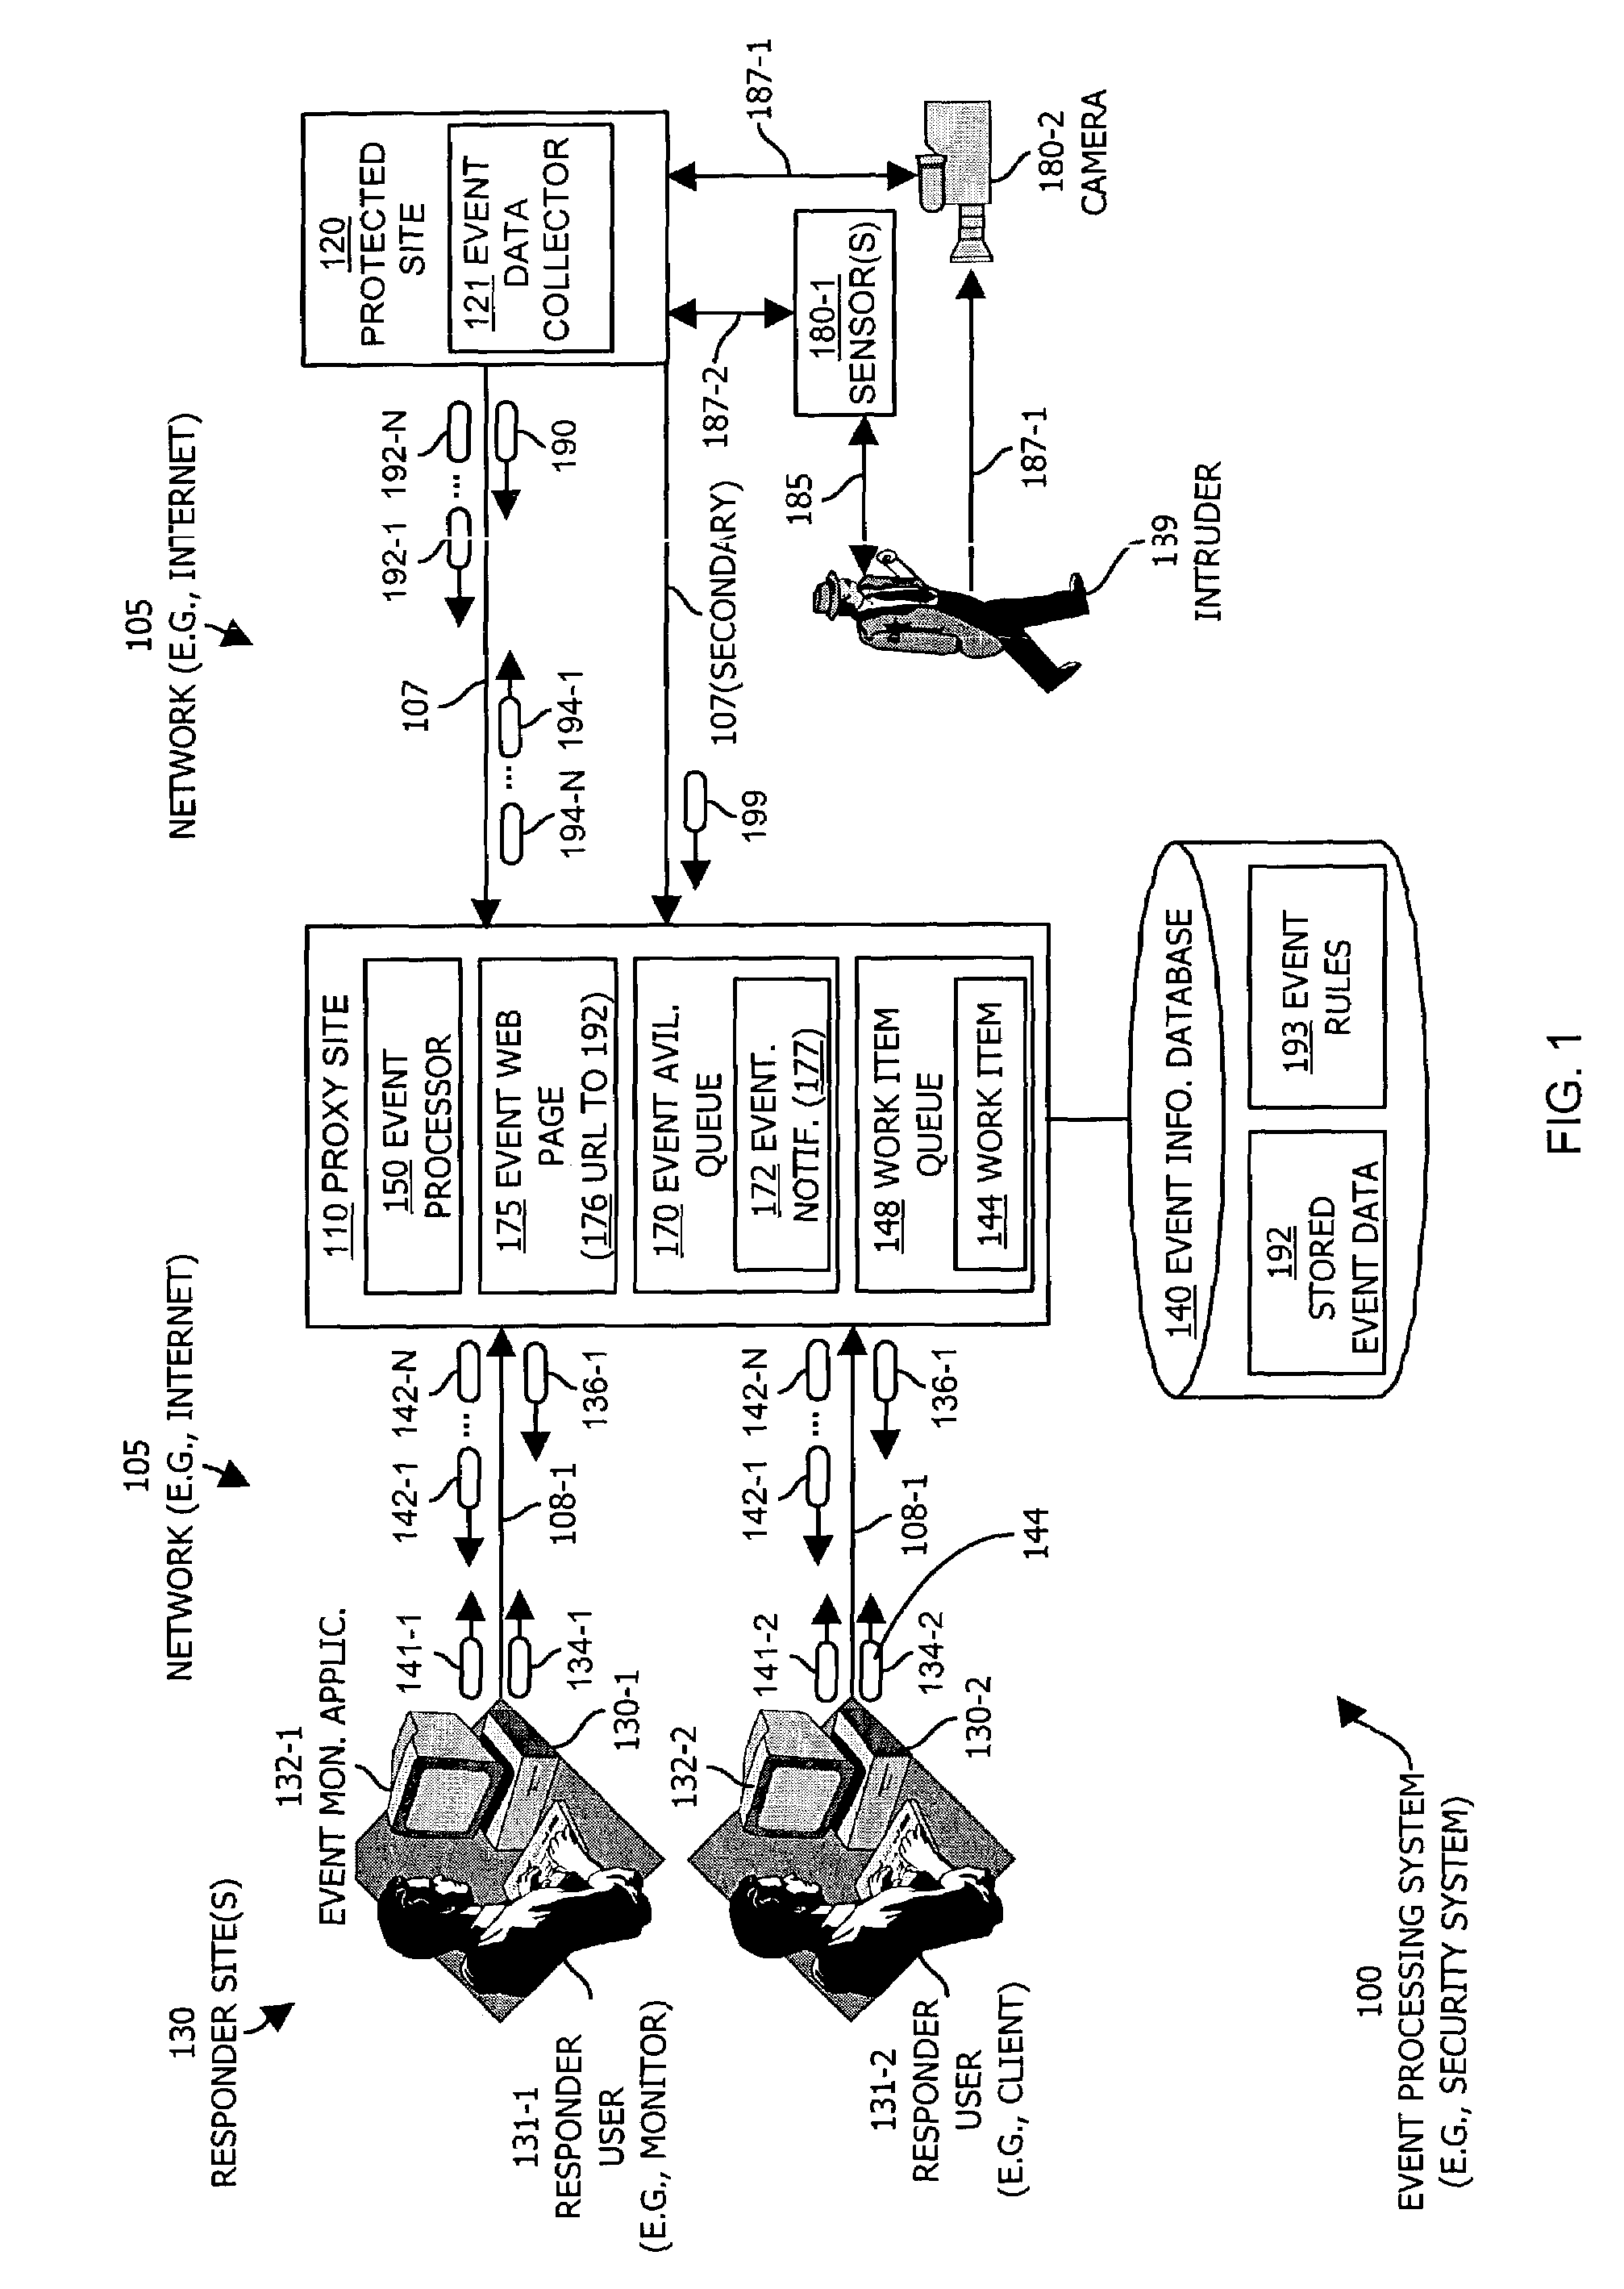 Methods and apparatus providing remote monitoring of security and video systems